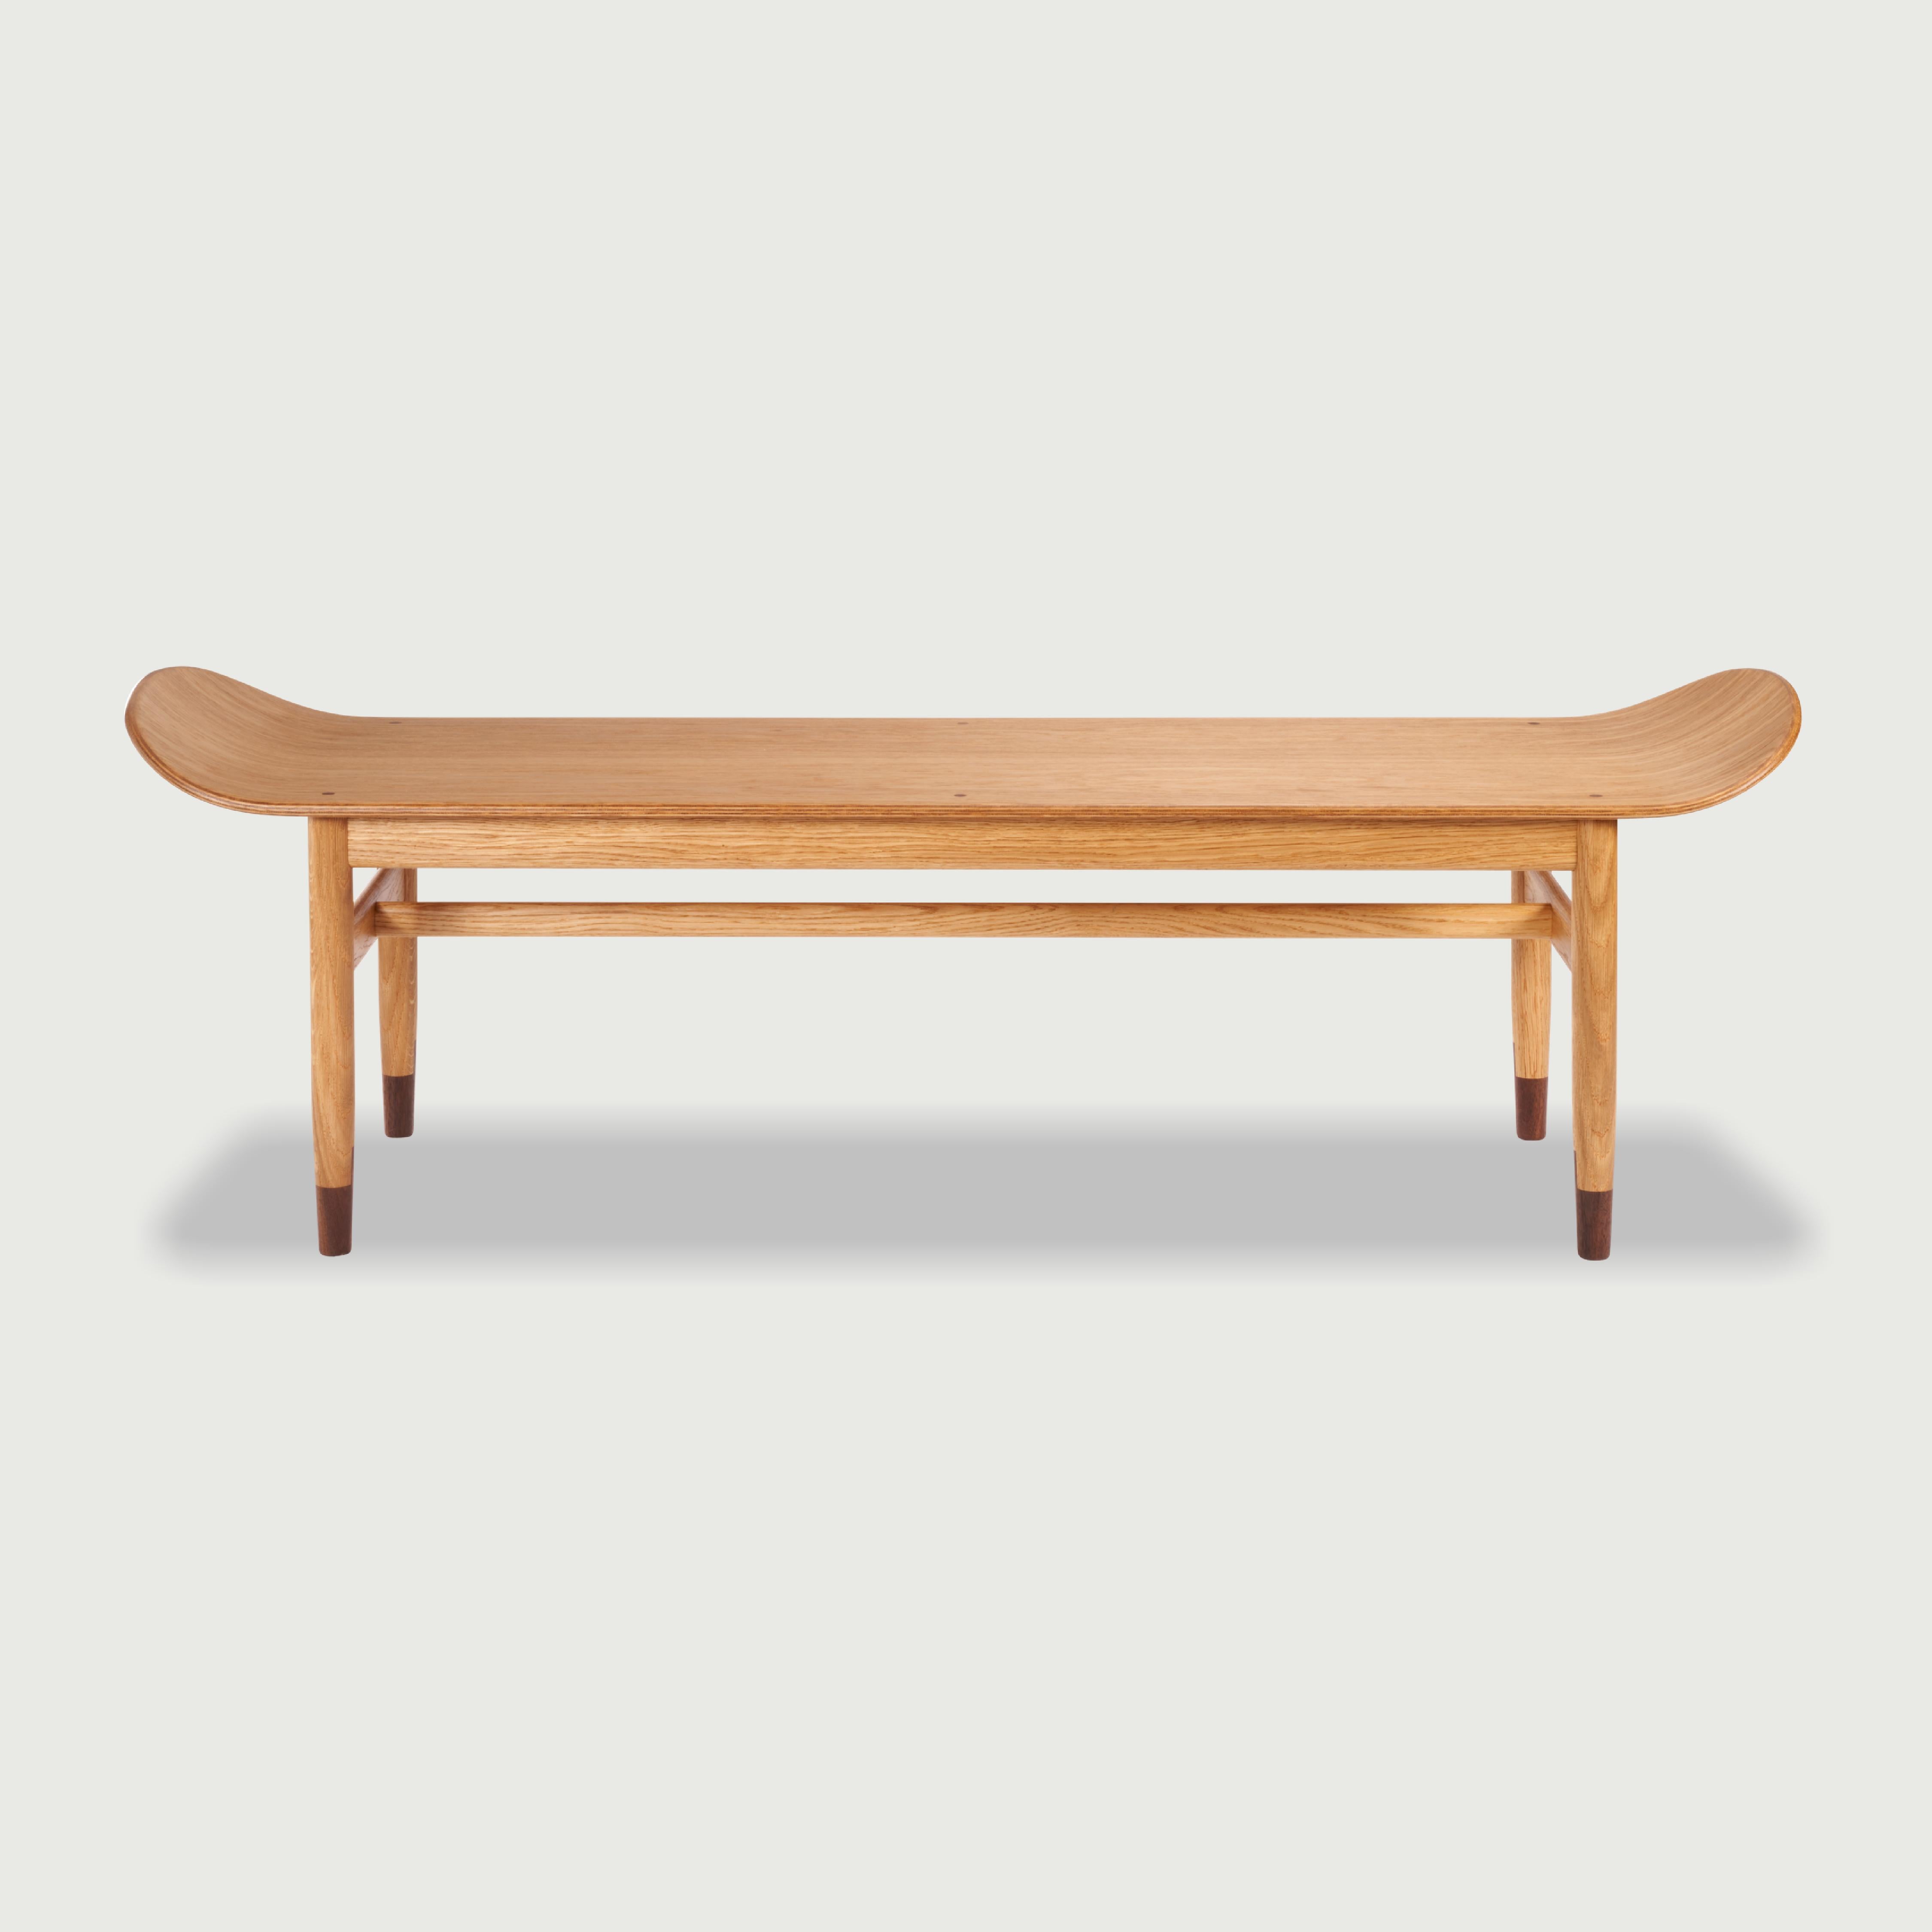 The bench made of oak with characteristic raised sides is hand cut and modelled. The seat built of 9 layers of 1.5 mm thick veneer creates a sturdy construction. Round tapered oak legs terminated with American walnut inserts are connected by